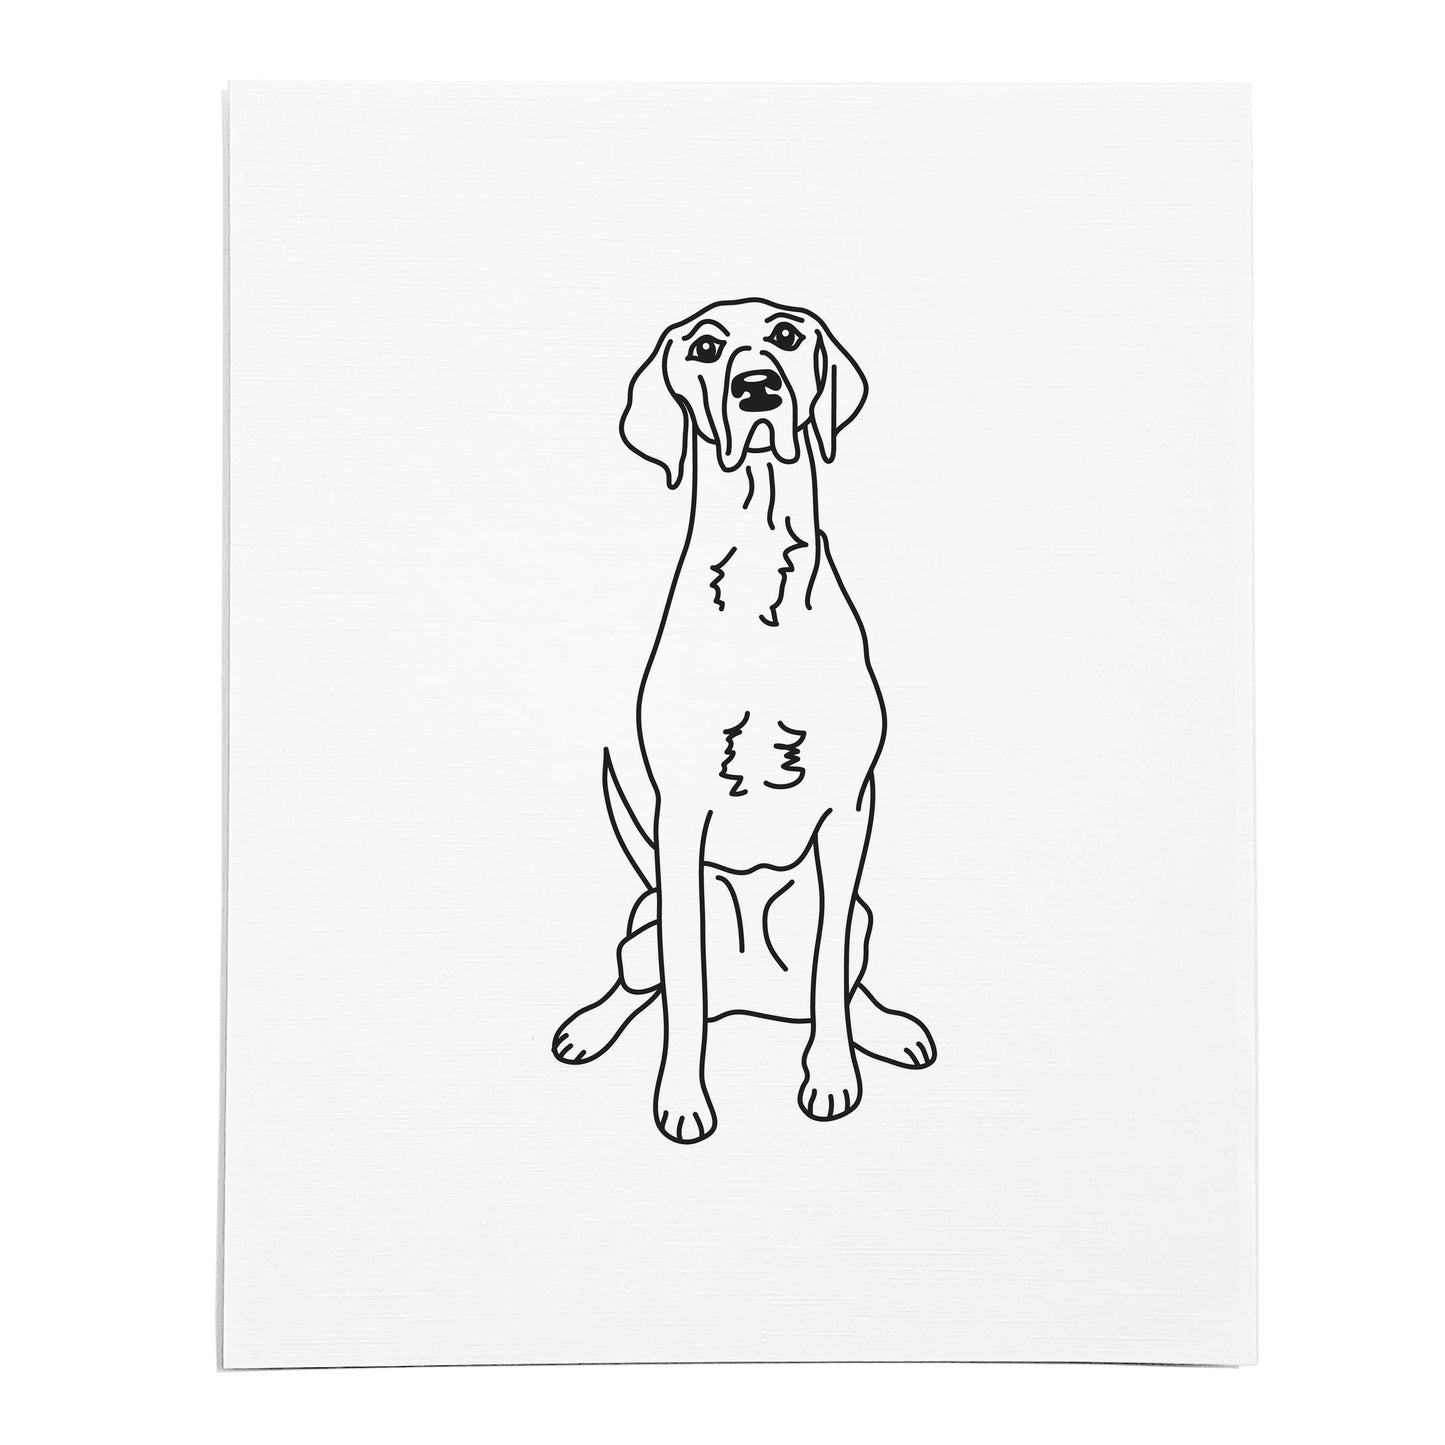 An art print featuring a line drawing of a Pointer dog on white linen paper